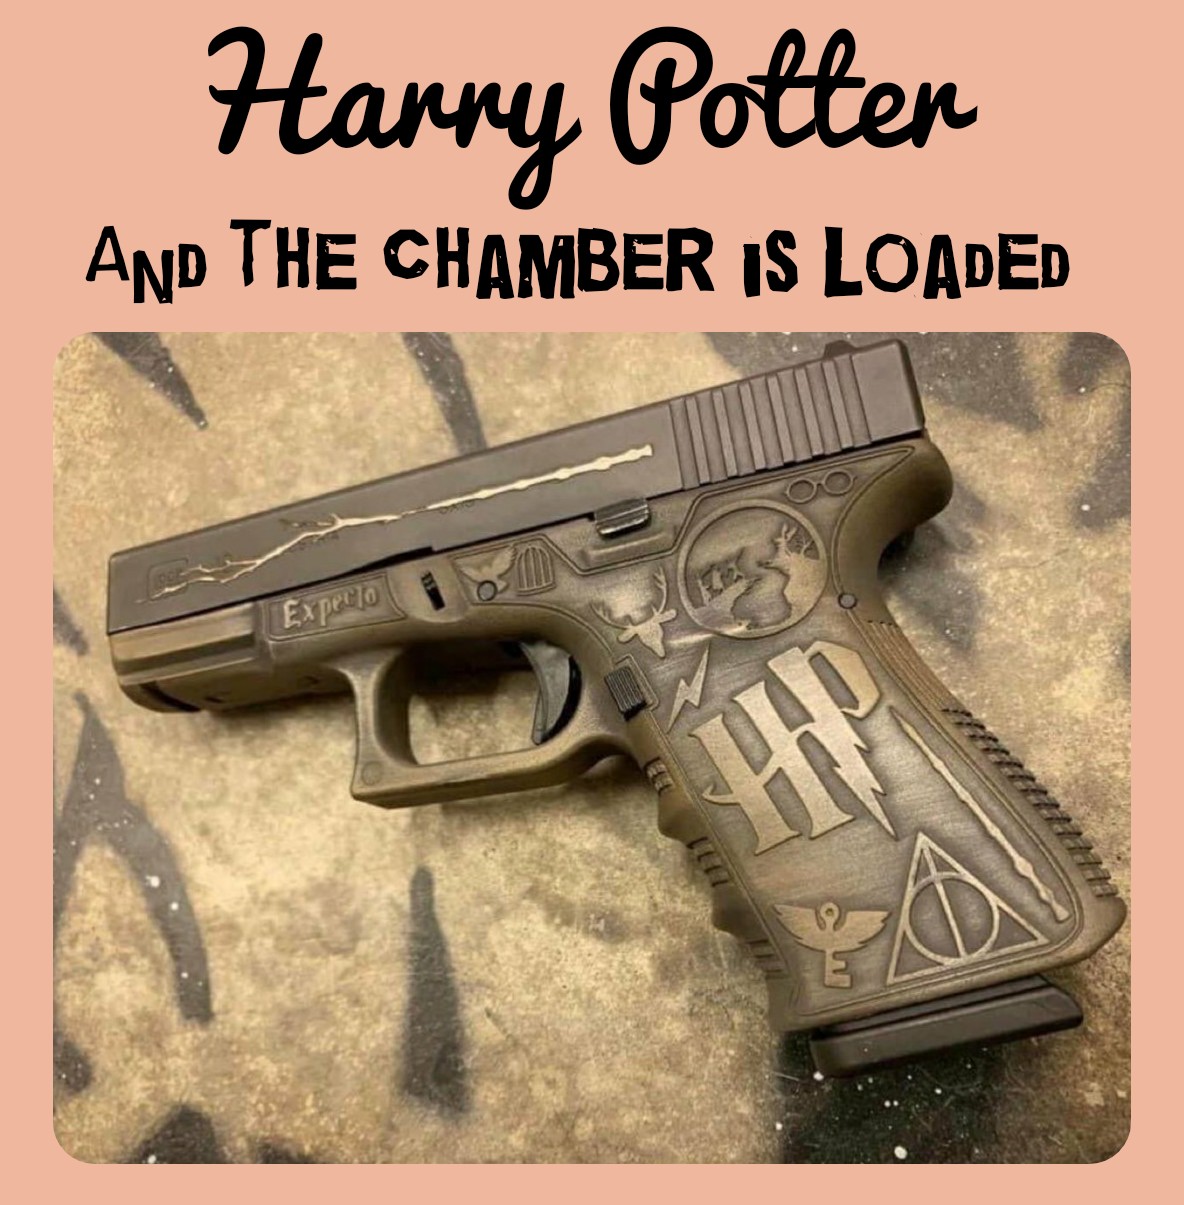 dank memes - harry potter glock meme - Harry Potter And The Chamber Is Loaded M Expeclo